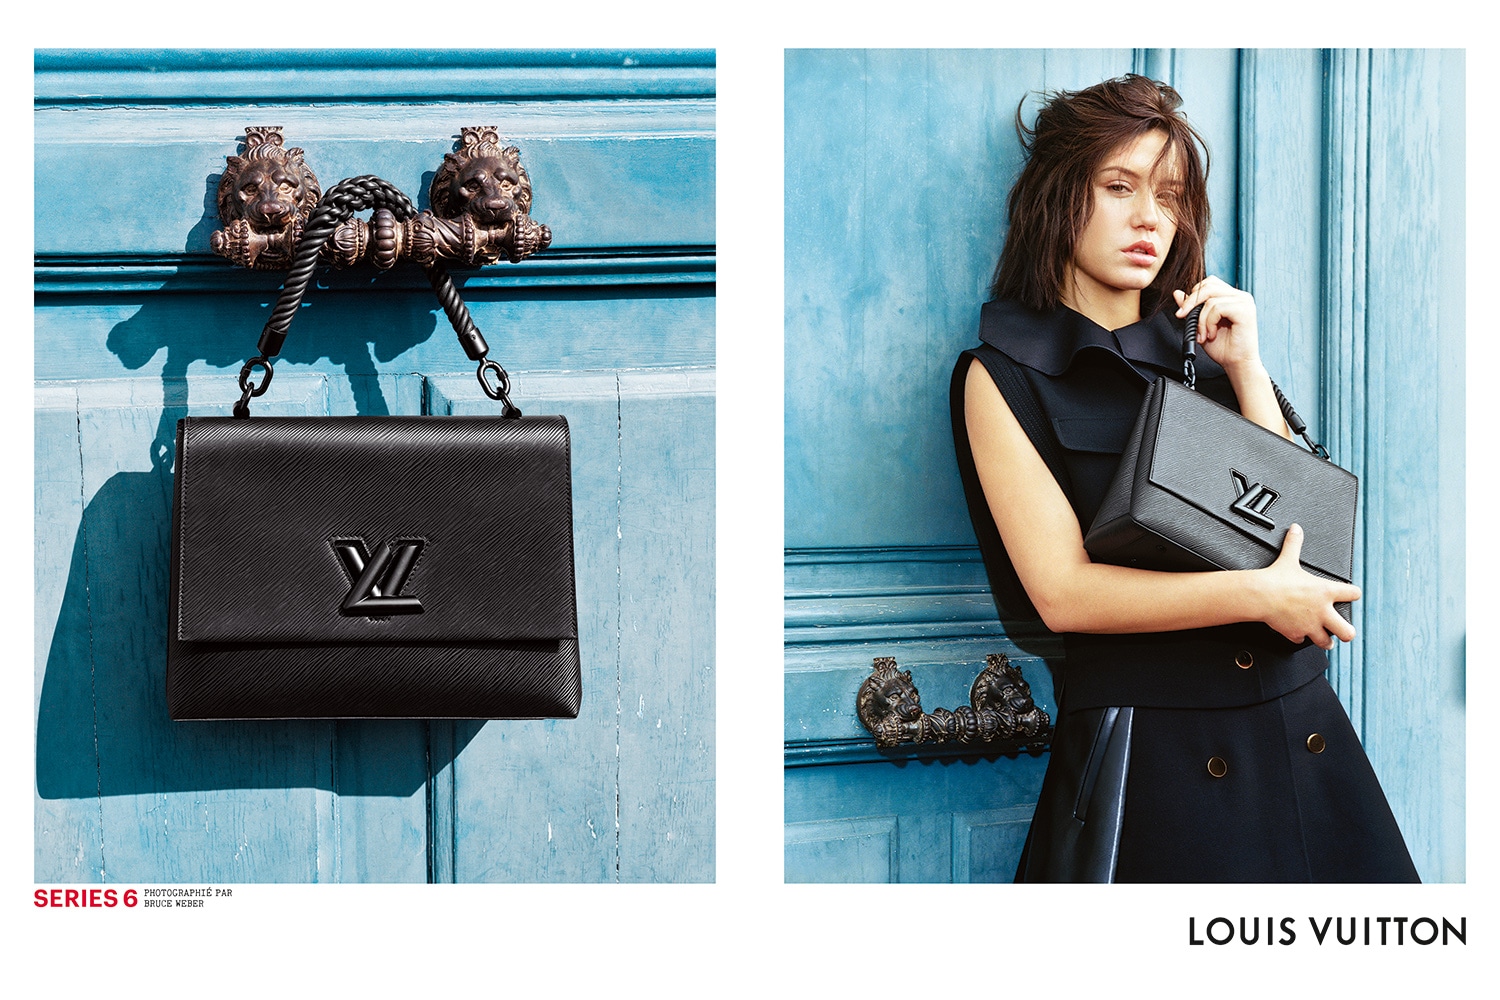 LV bags editorial stock photo. Image of display, reseller - 261042433